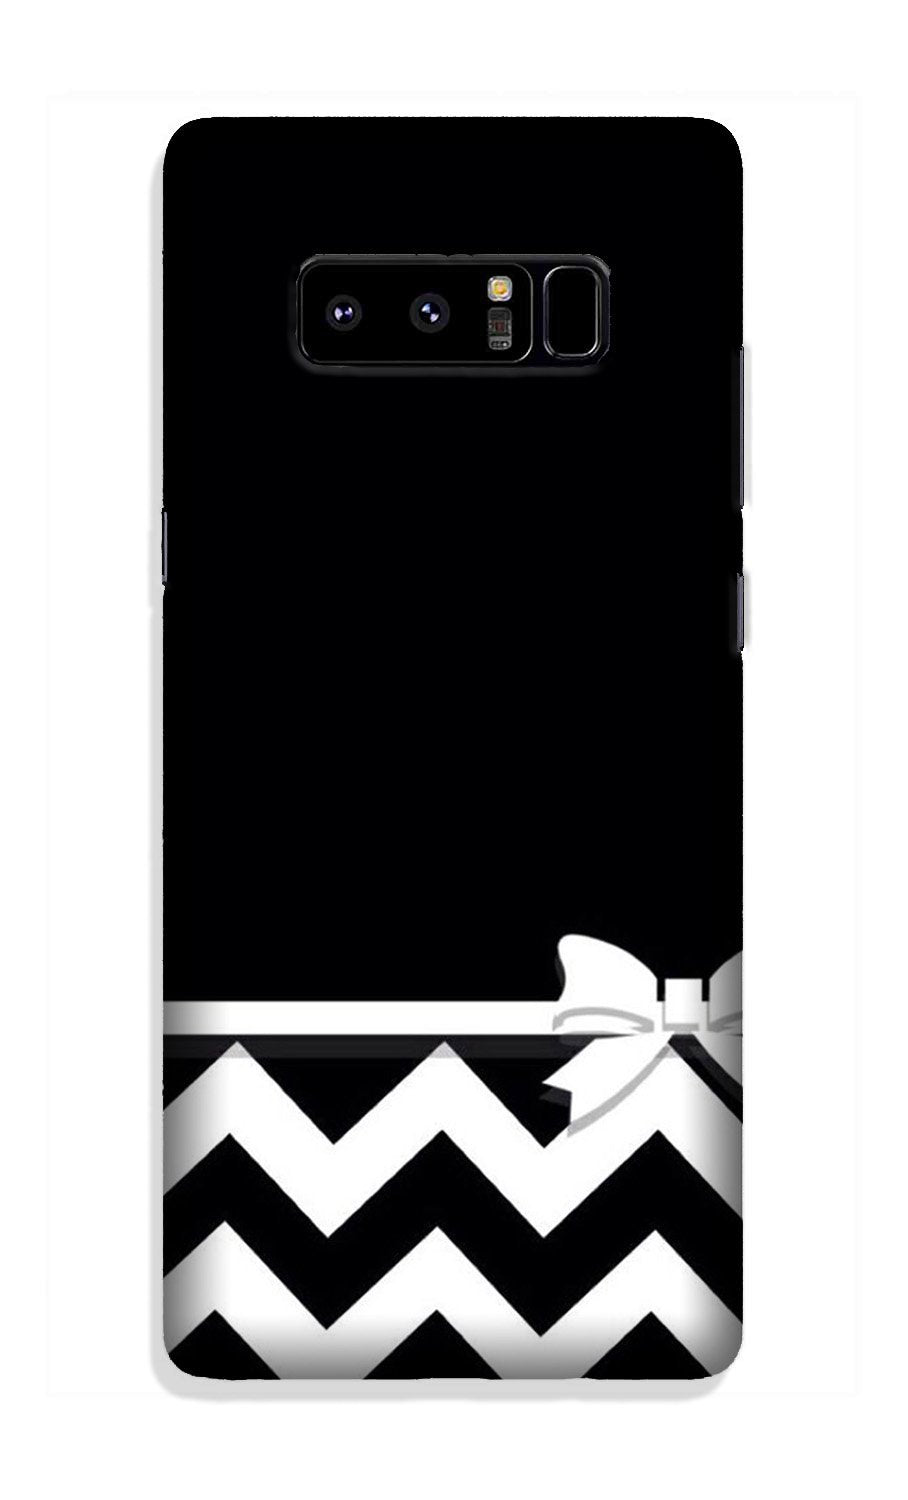 Gift Wrap7 Case for Galaxy Note 8